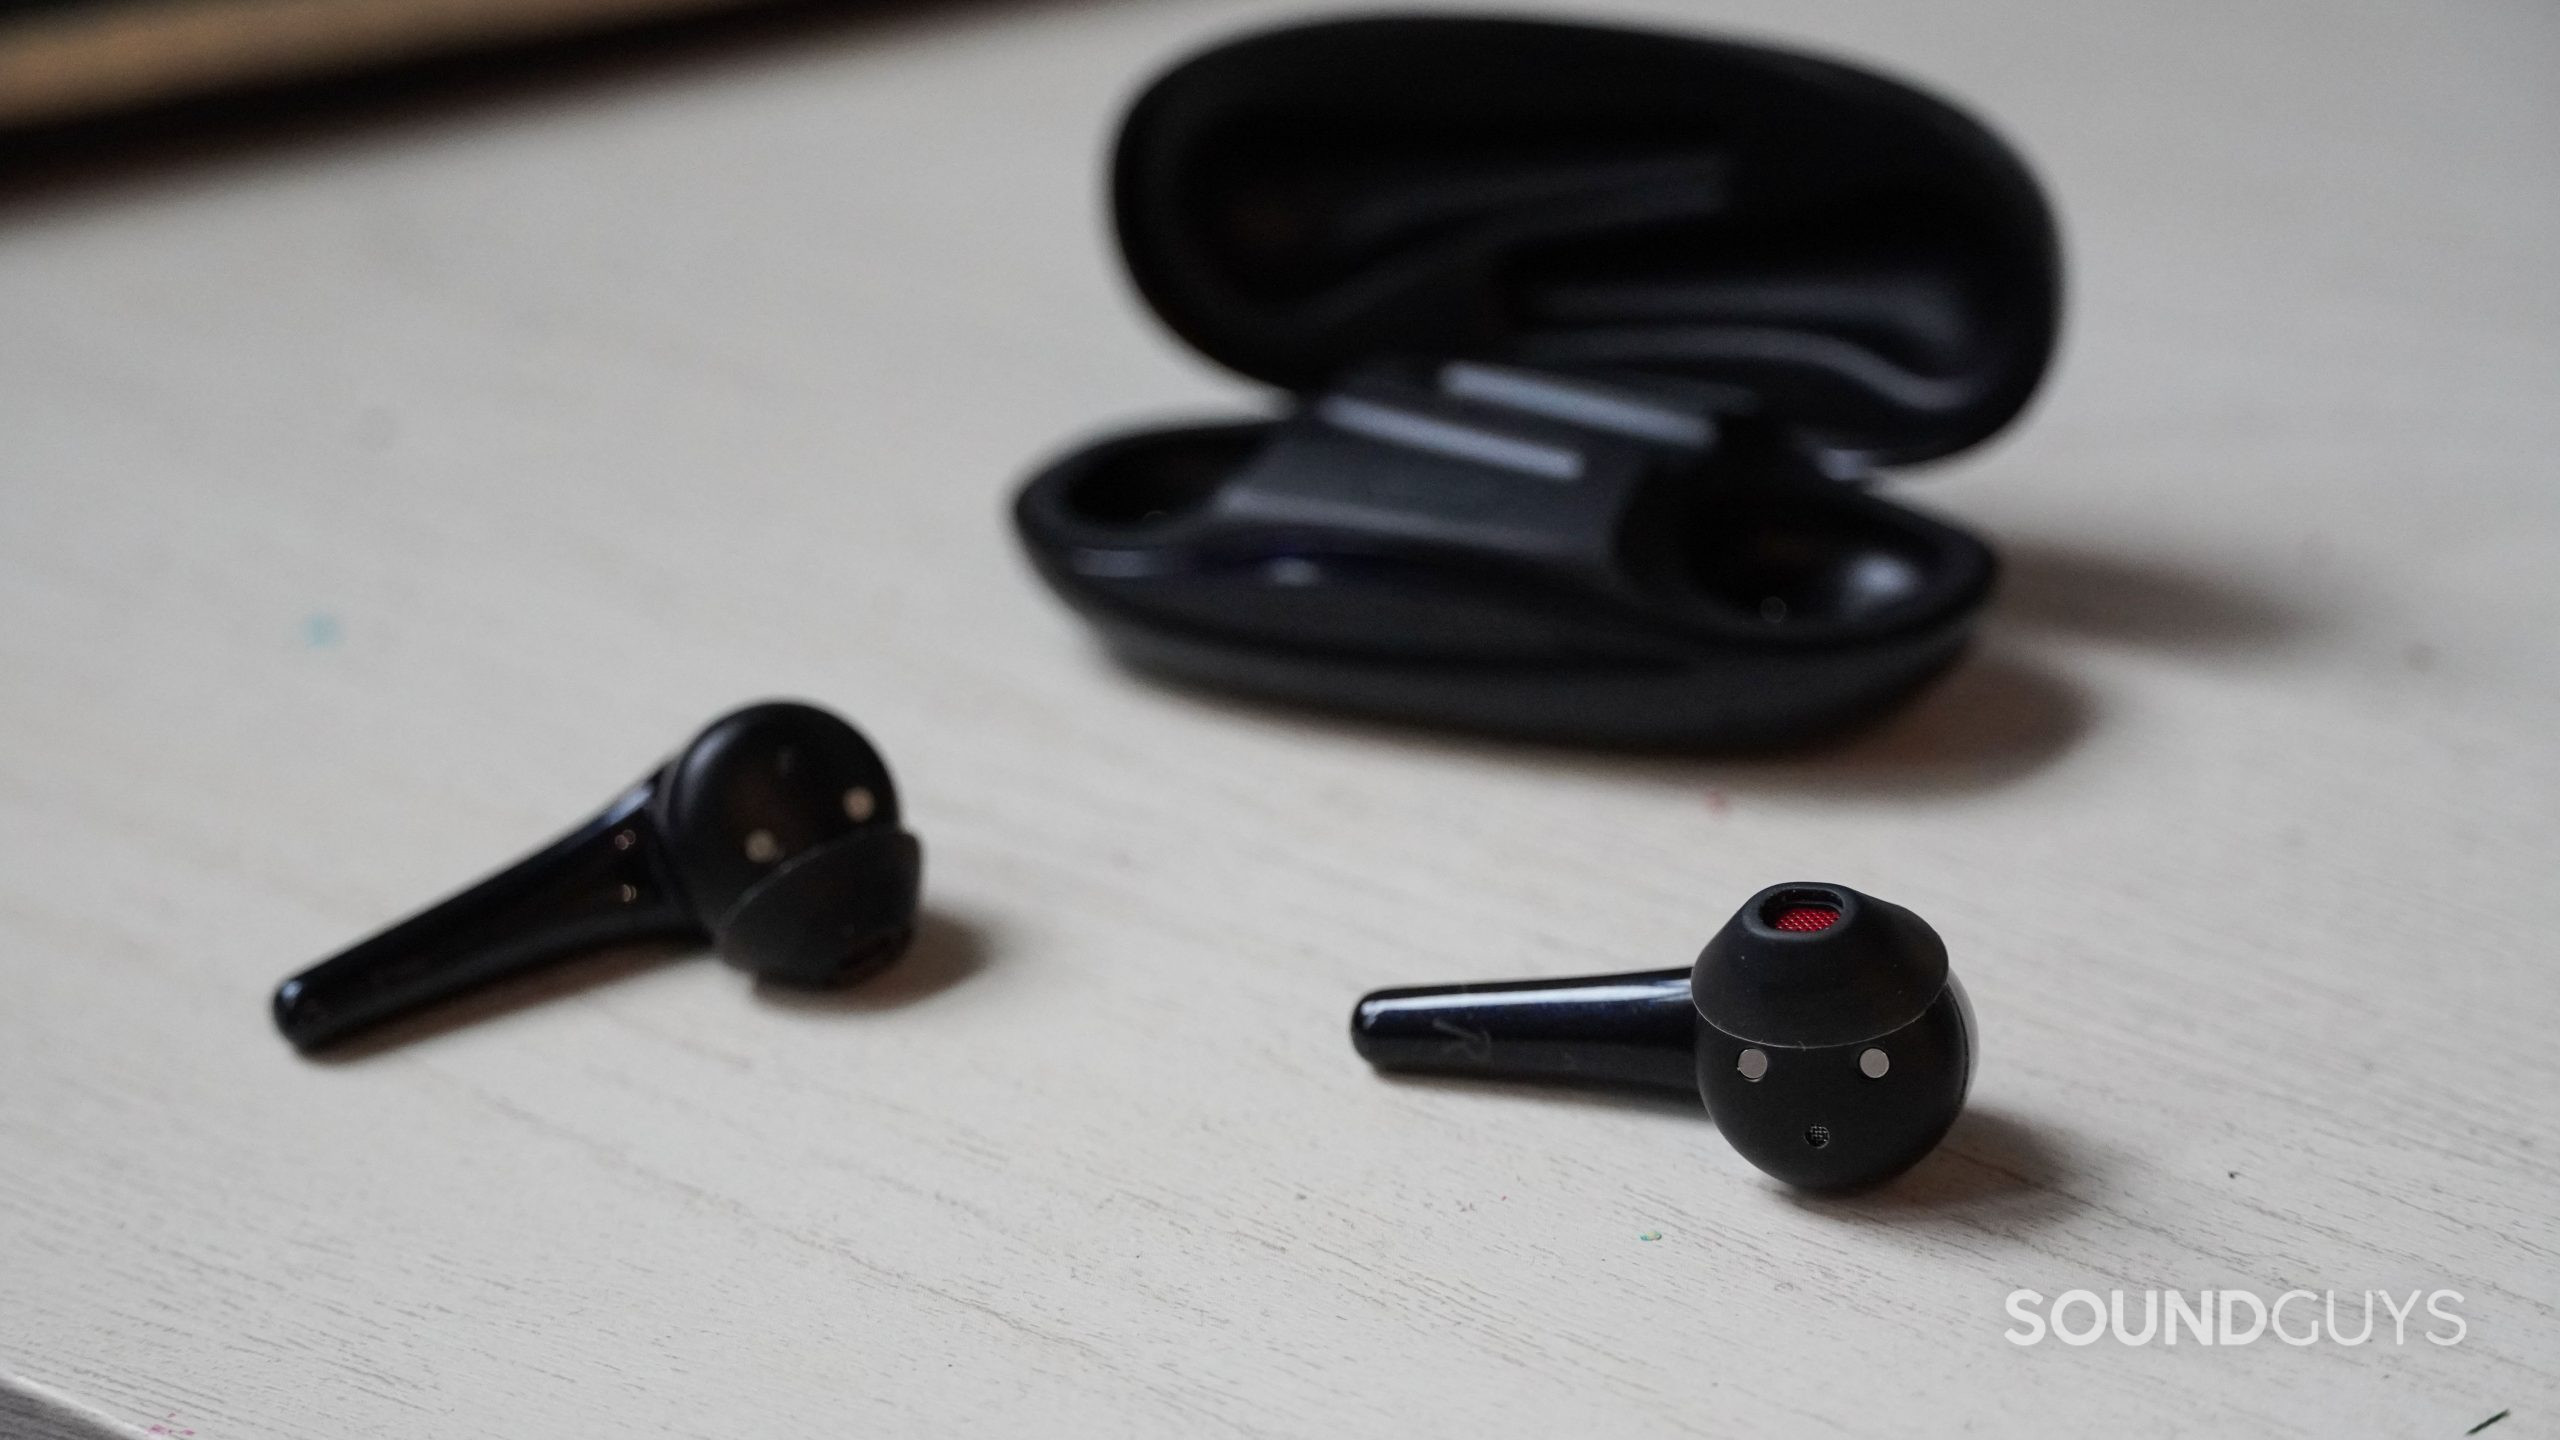 The 1MORE Comfobuds 2 earbuds and case on an off-white table.